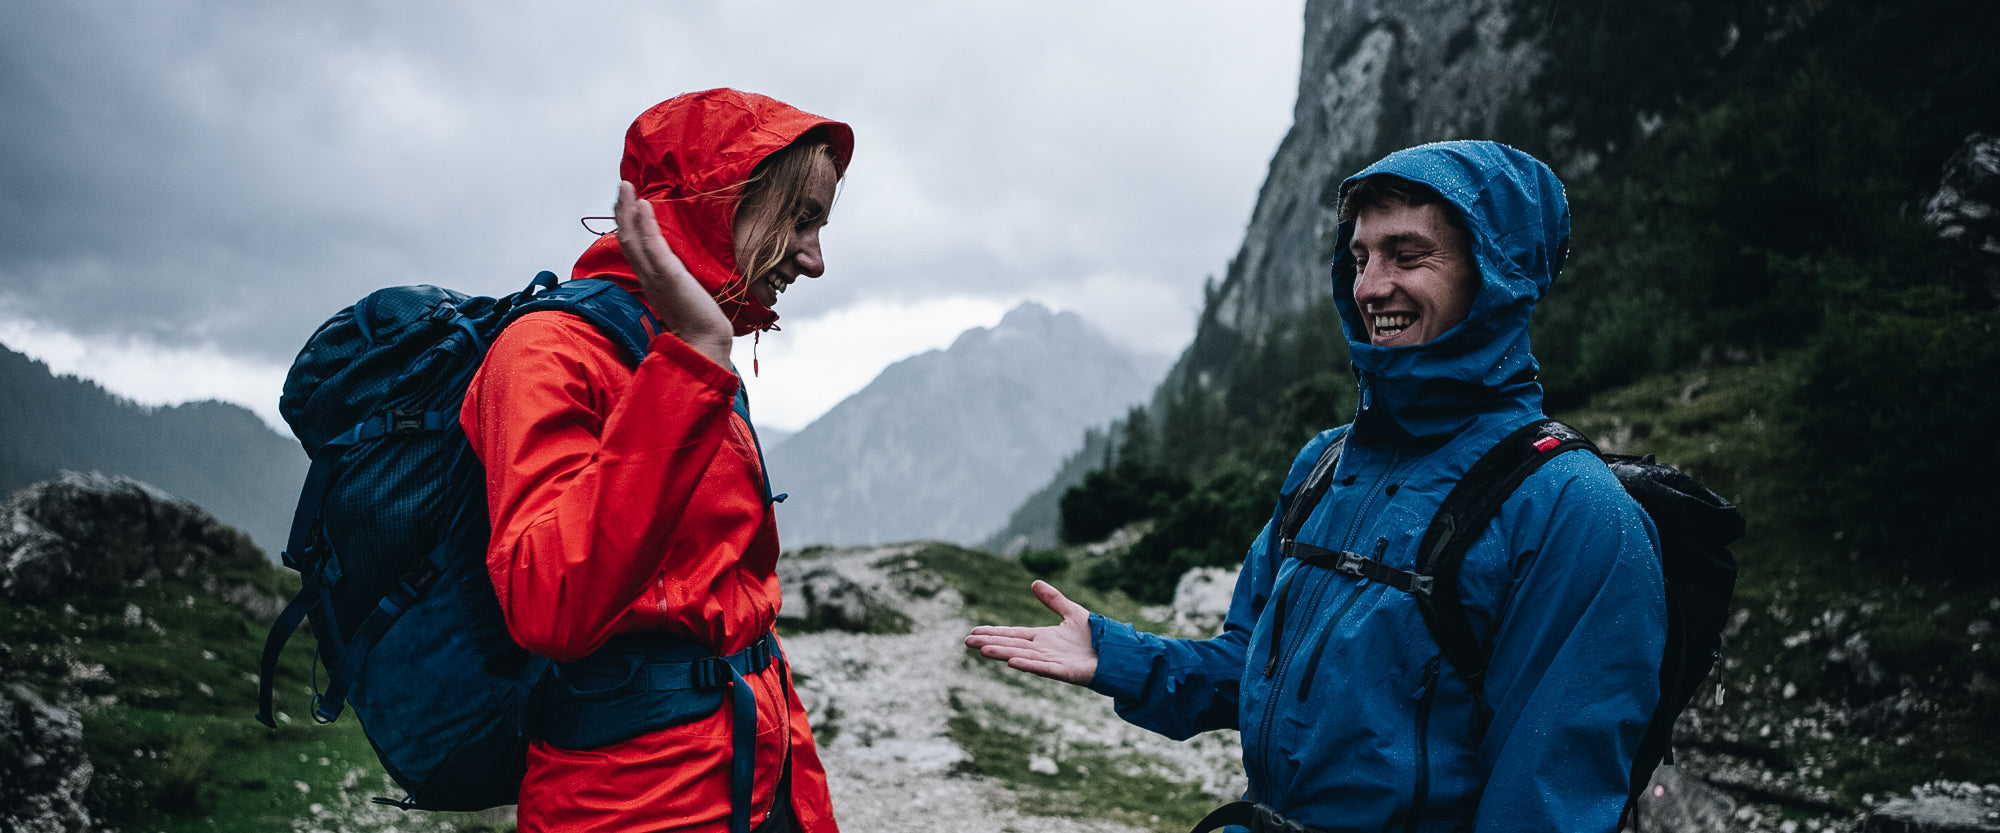 How to Clean and Take Care of Outdoor Clothing